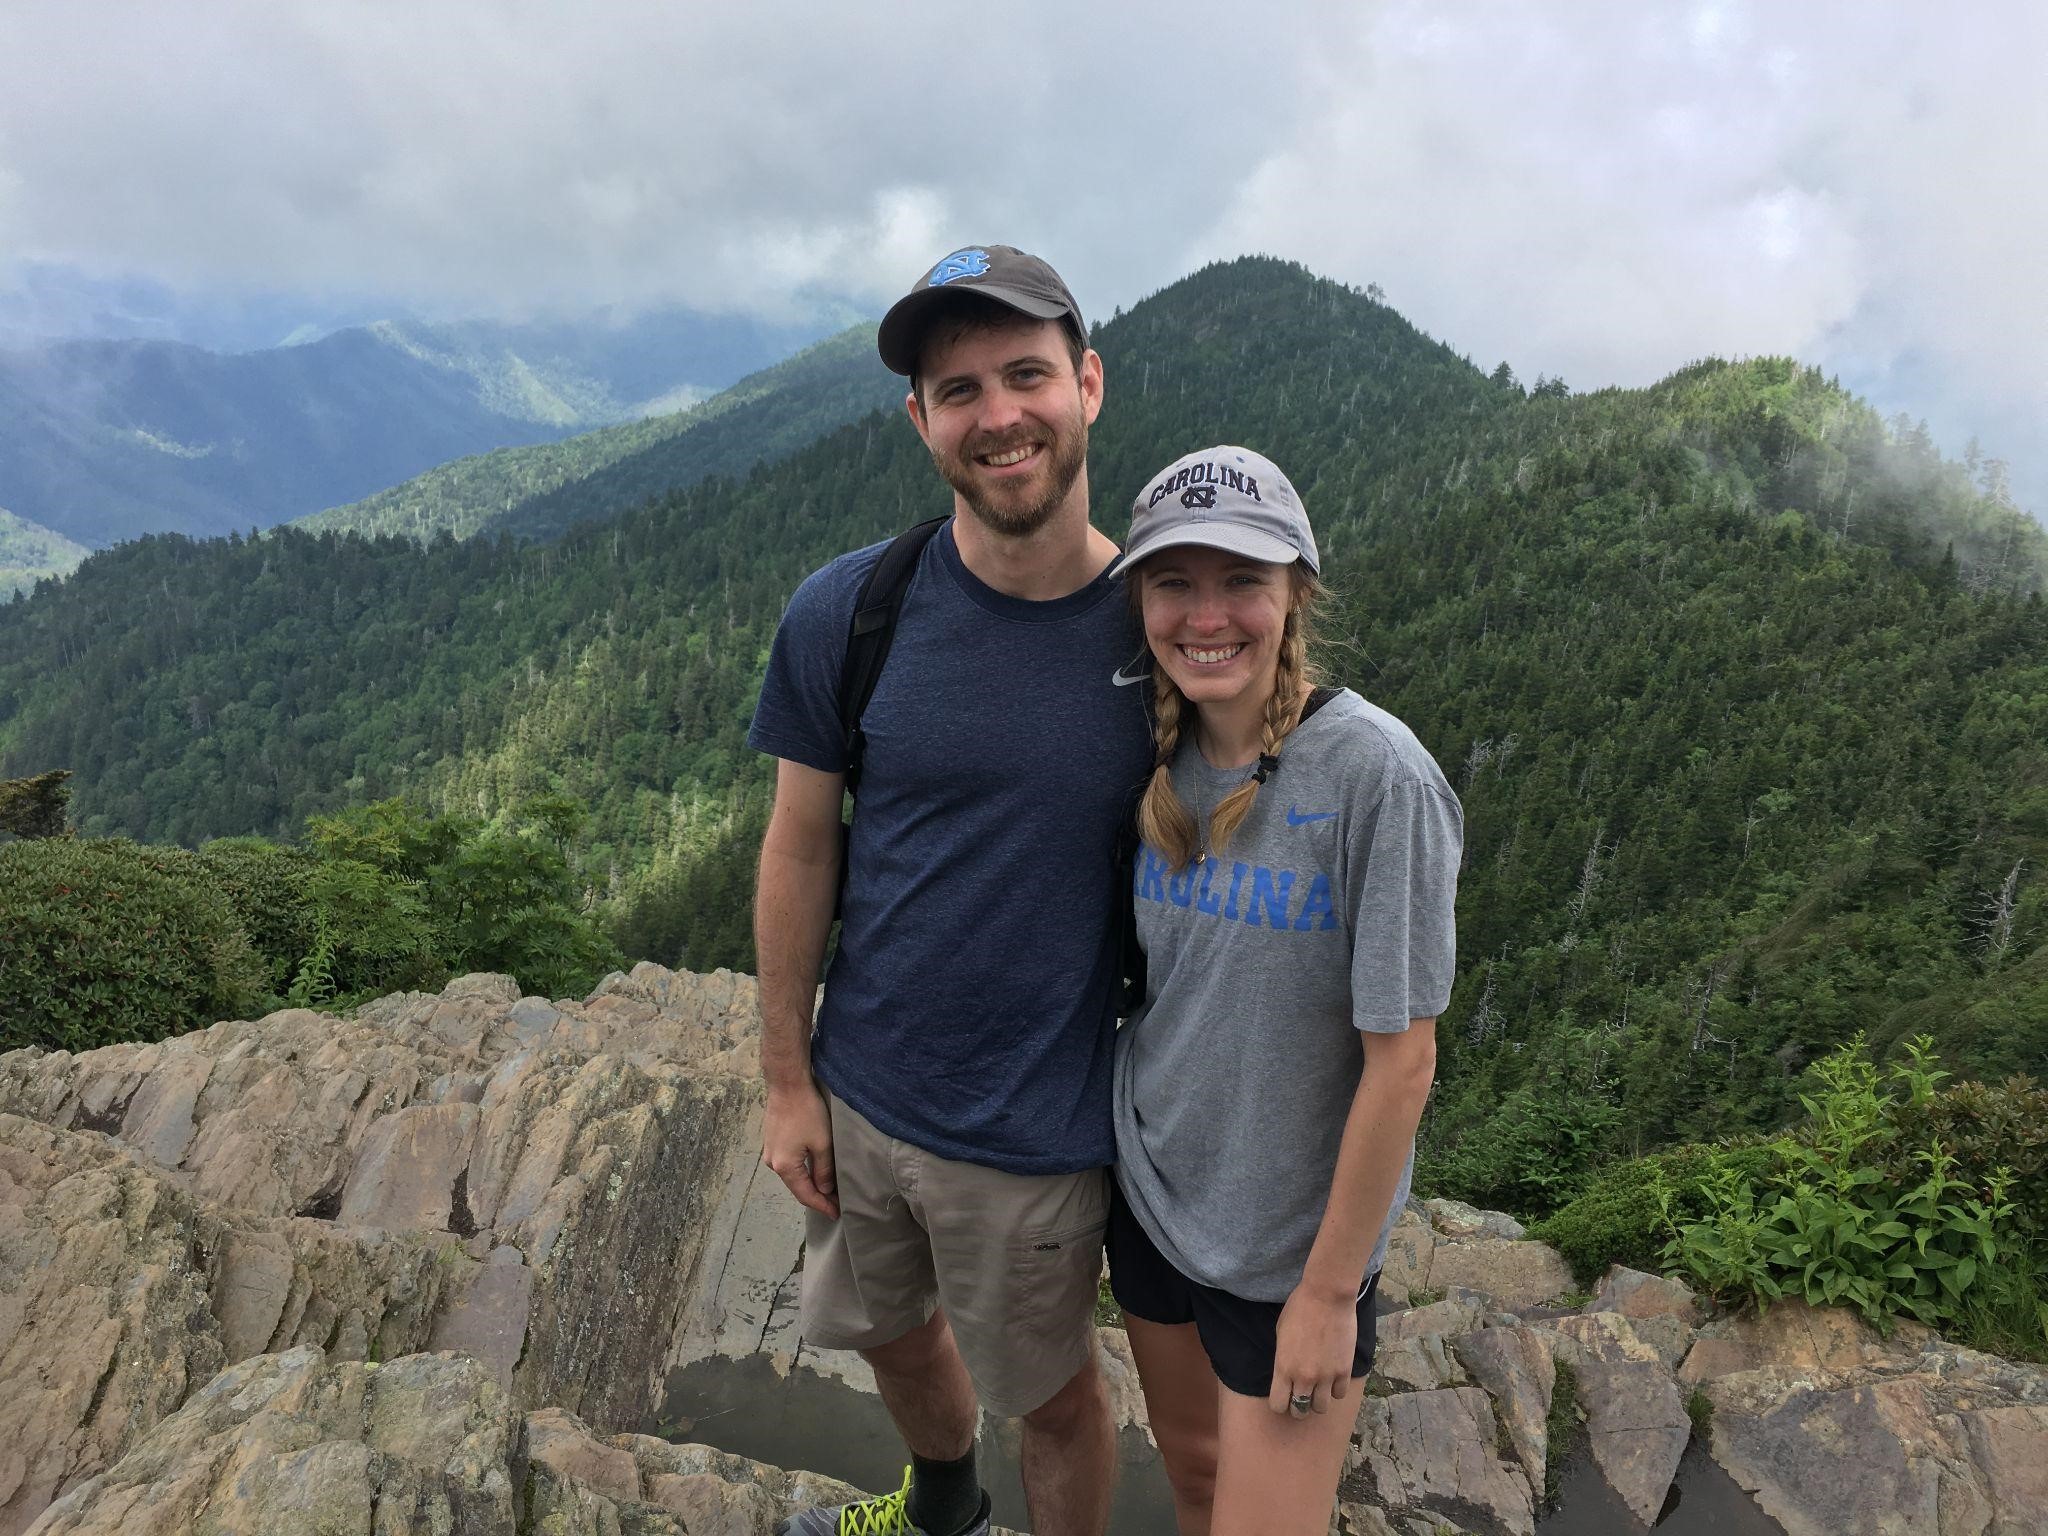 Two people, Philip and Allie, stand in front of a rocky mountaintop surrounded by wooded peaks with a cloudy sky.